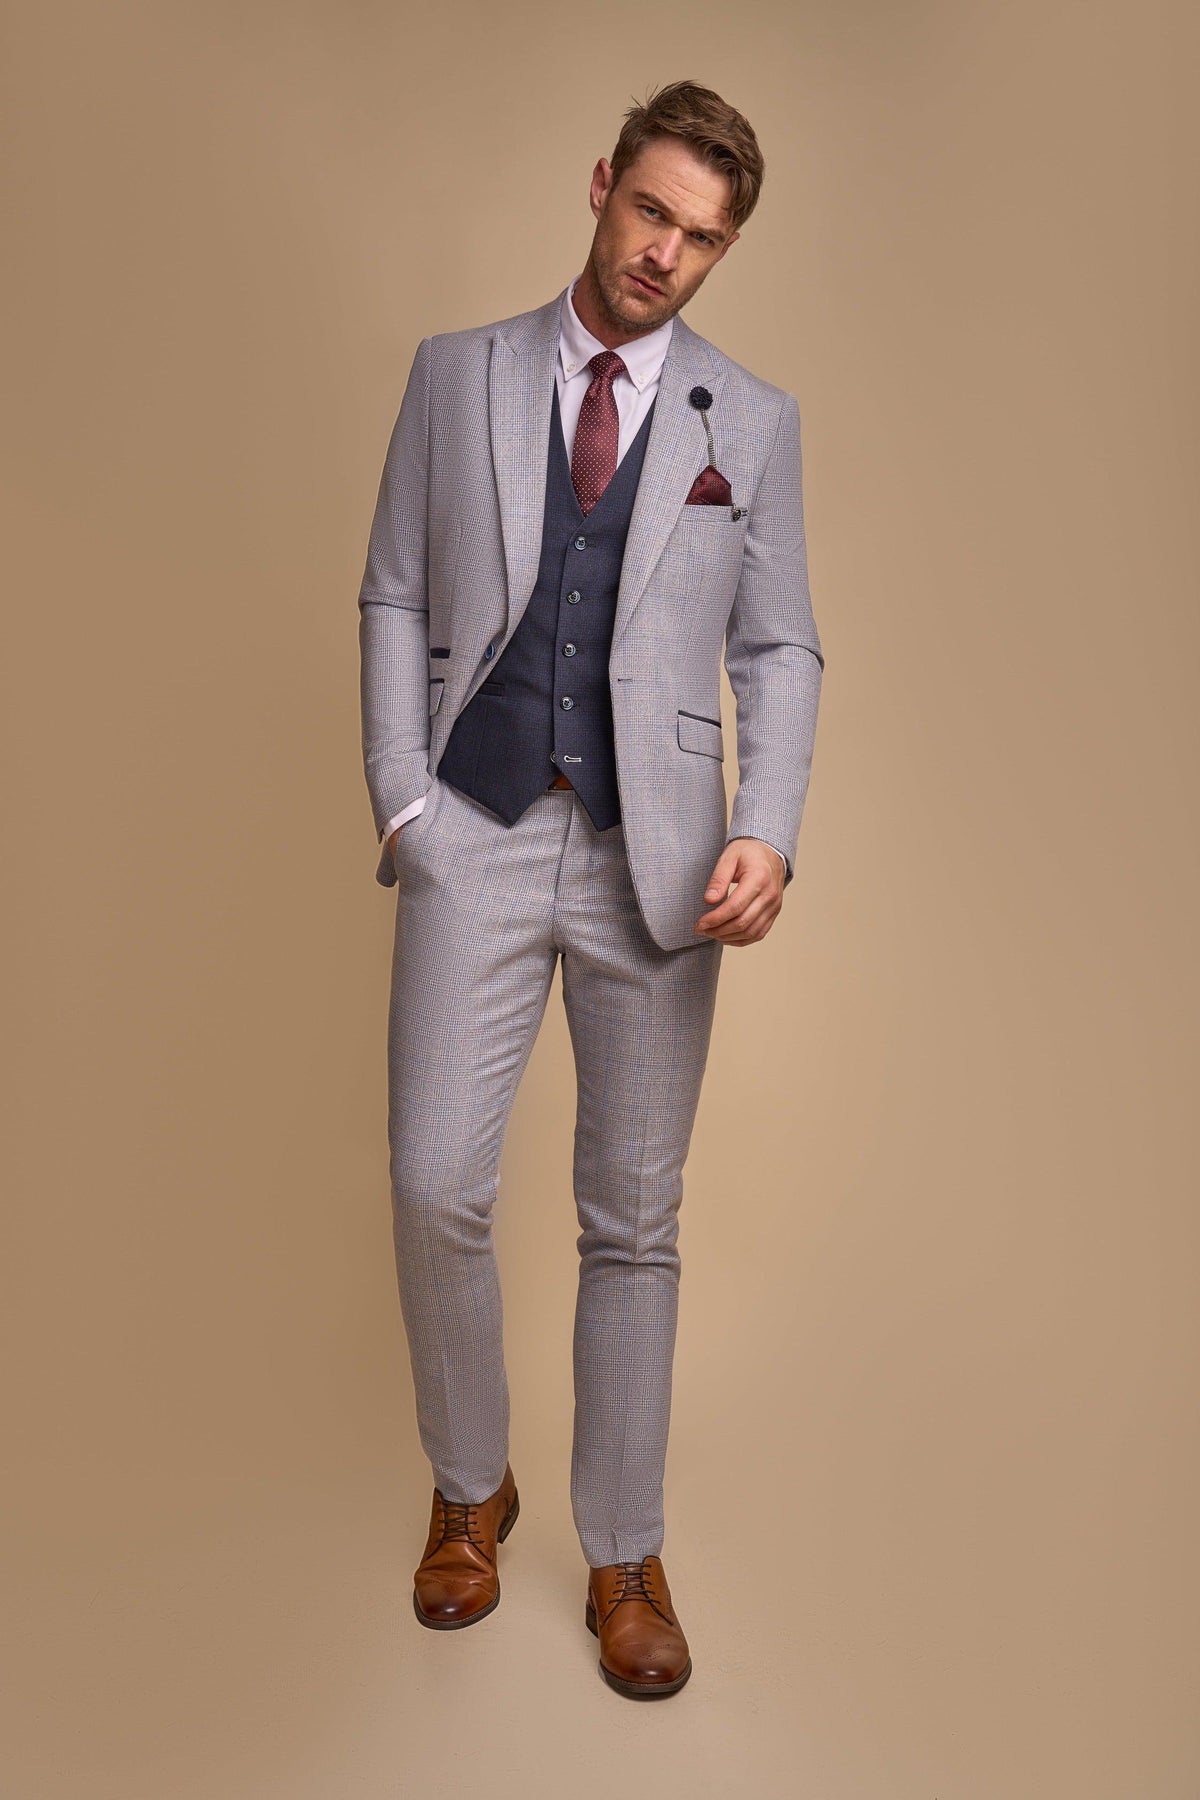 Caridi Sky Suit With Navy Waistcoat Front